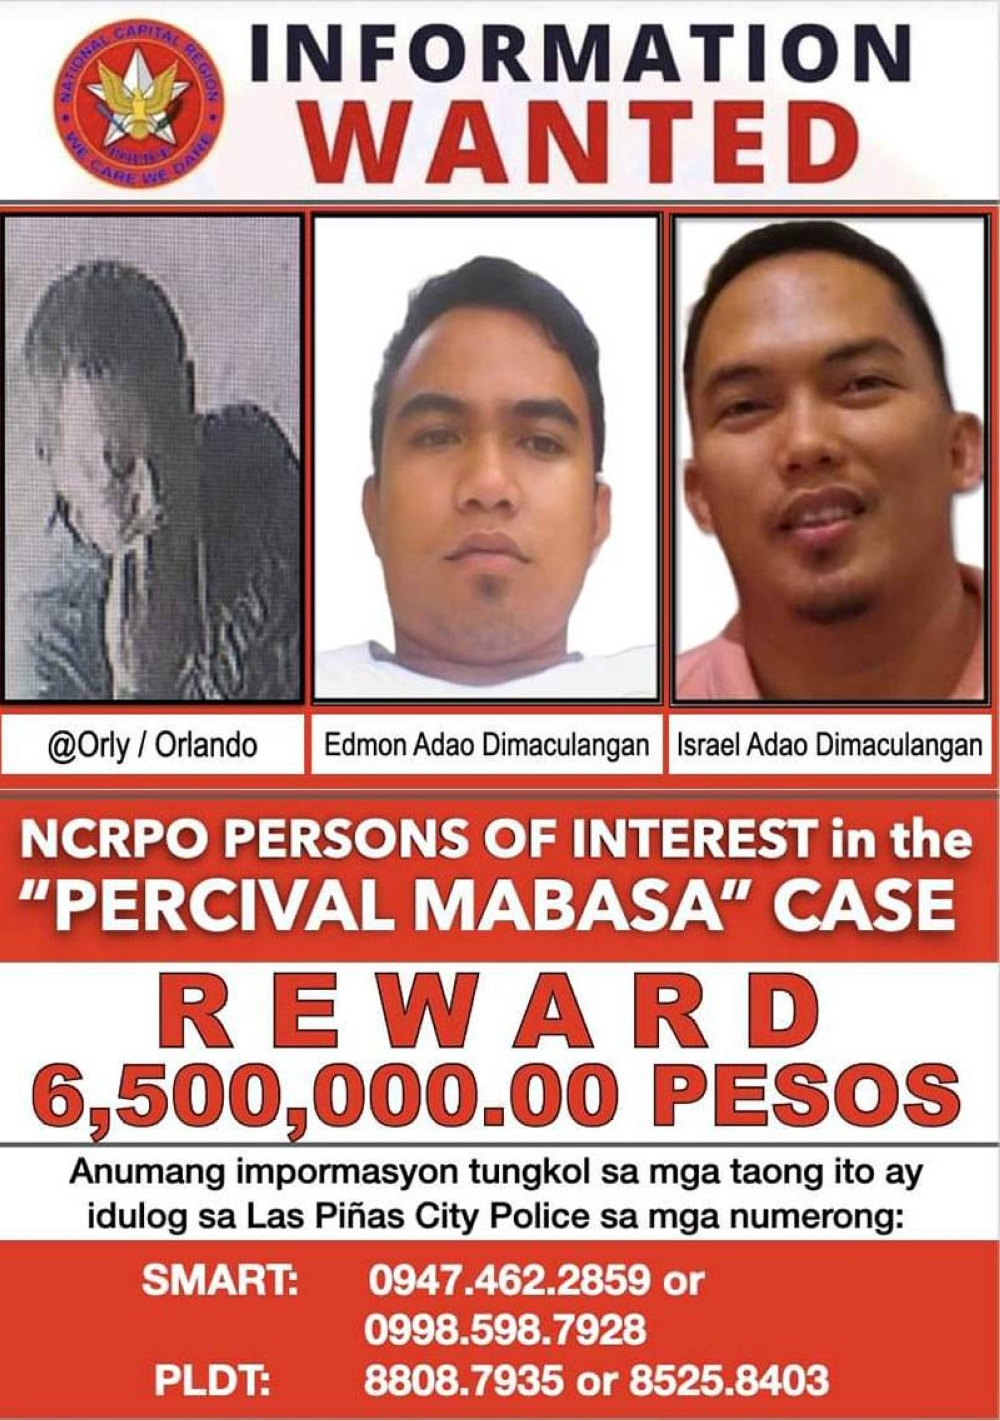 A wanted poster issued by the police. COURTESY OF NCRPO